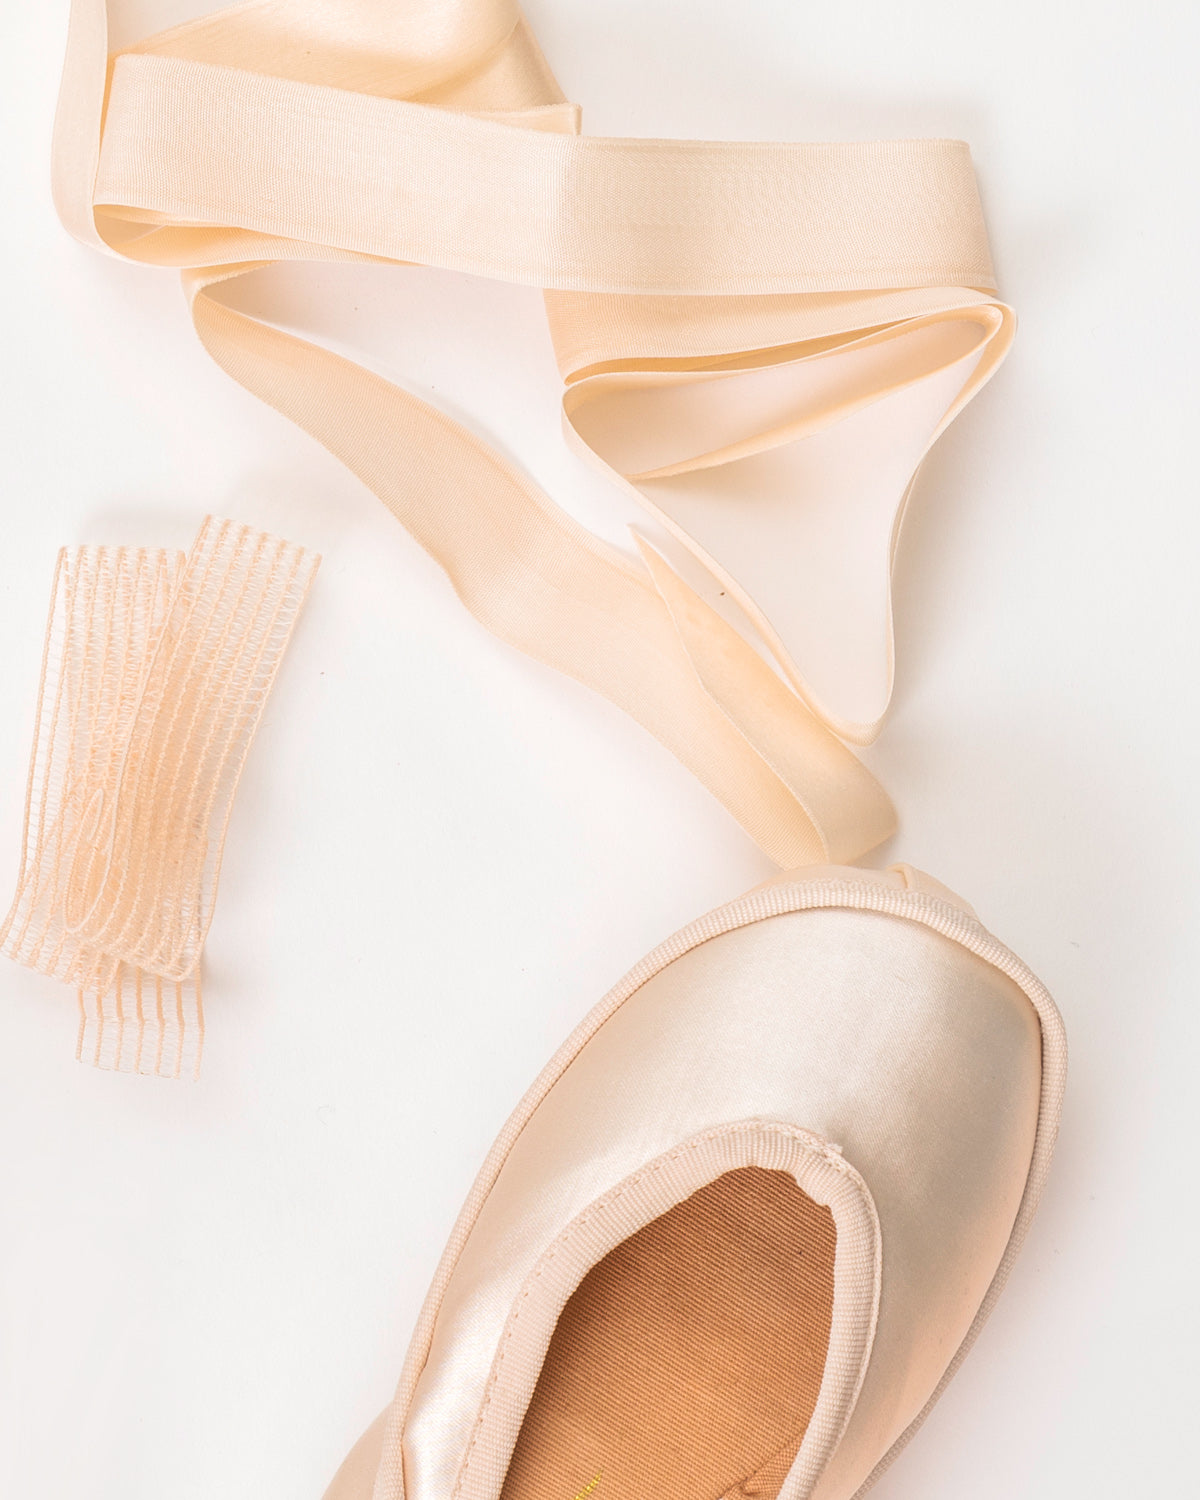 types of pointe shoe ribbons